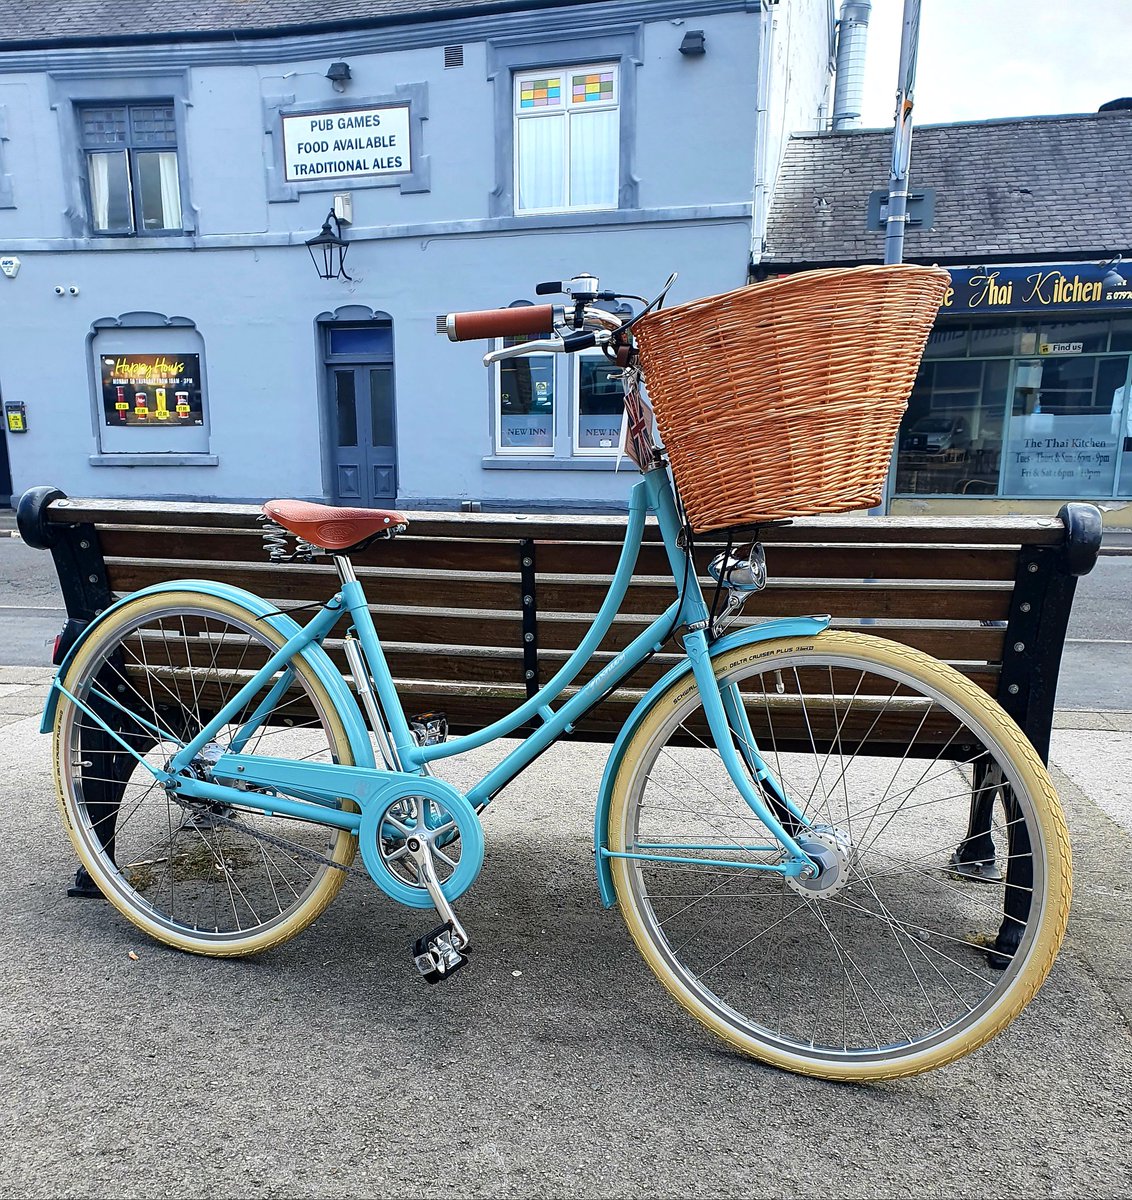 𝓟𝓪𝓼𝓱𝓵𝓮𝔂 𝓑𝓻𝓲𝓽𝓪𝓷𝓷𝓲𝓪 

Celebrate all that is best about our green and pleasant land with the Britannia, a tribute to our proud British heritage 🇬🇧 

Also available in Royal Blue 💙

#pashley #pashleybritannia #Britannia #newbikeday #classic @pashleycycles